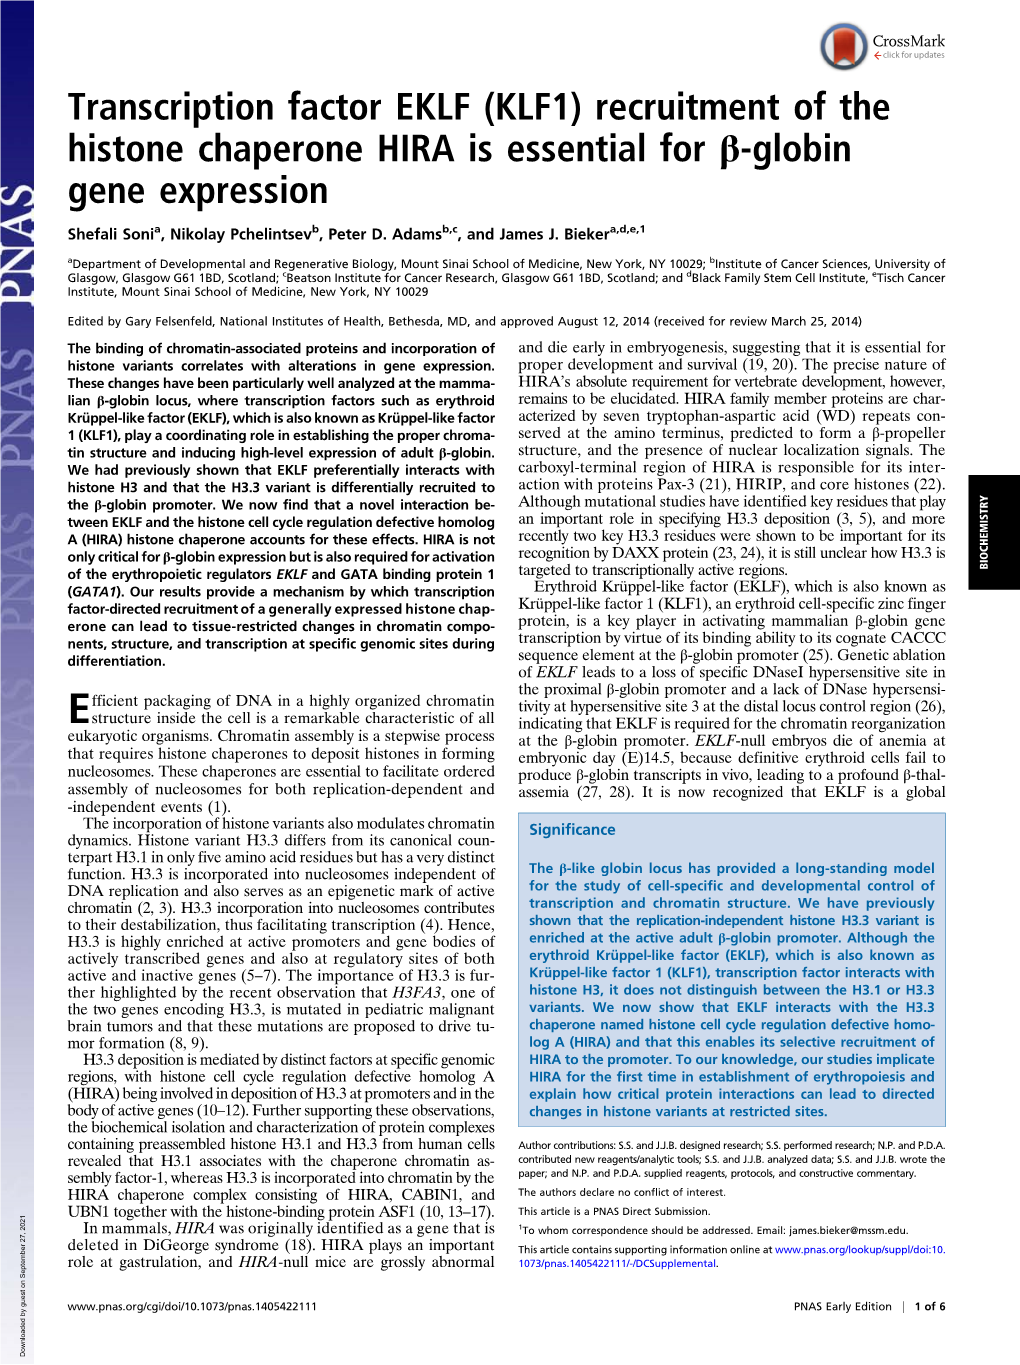 Recruitment of the Histone Chaperone HIRA Is Essential for Β-Globin Gene Expression